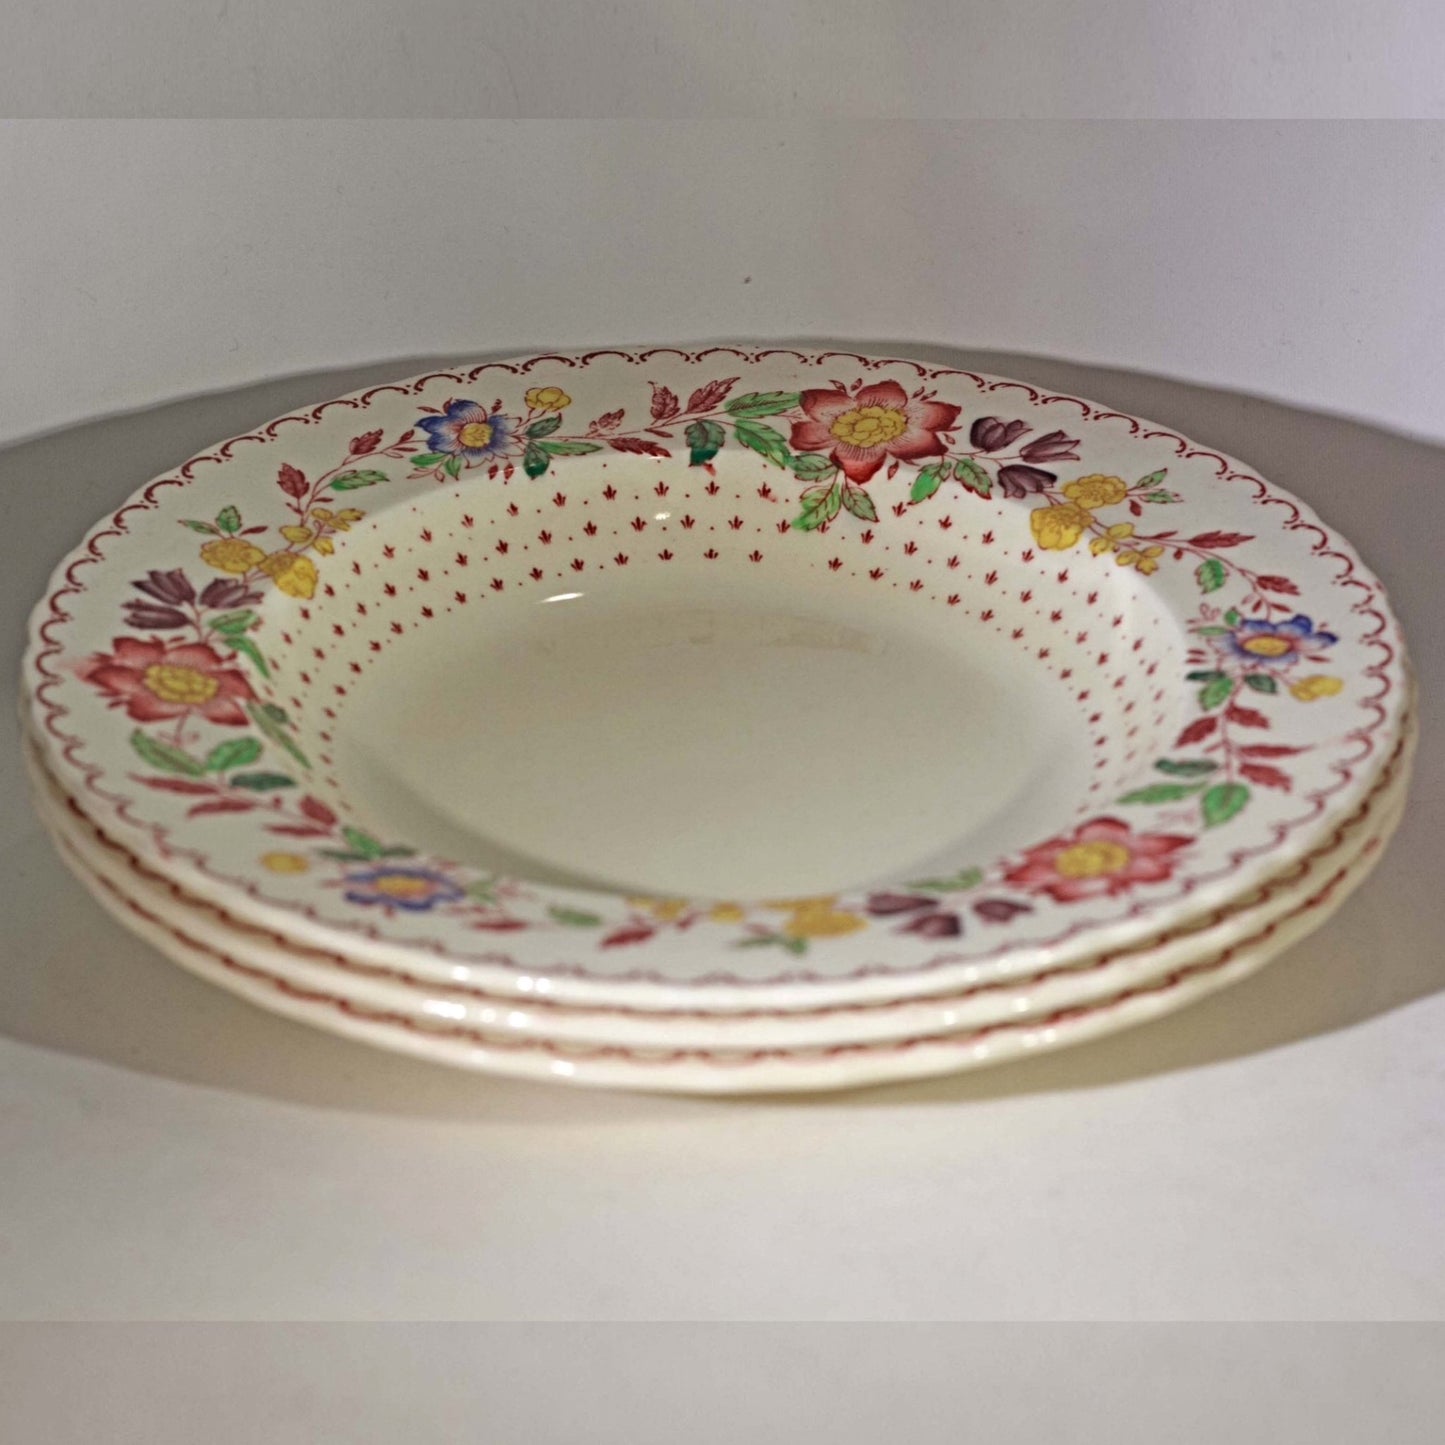 MASON'S PATENT IRONSTONE Rimmed Soup Bowl in Arbor Pattern